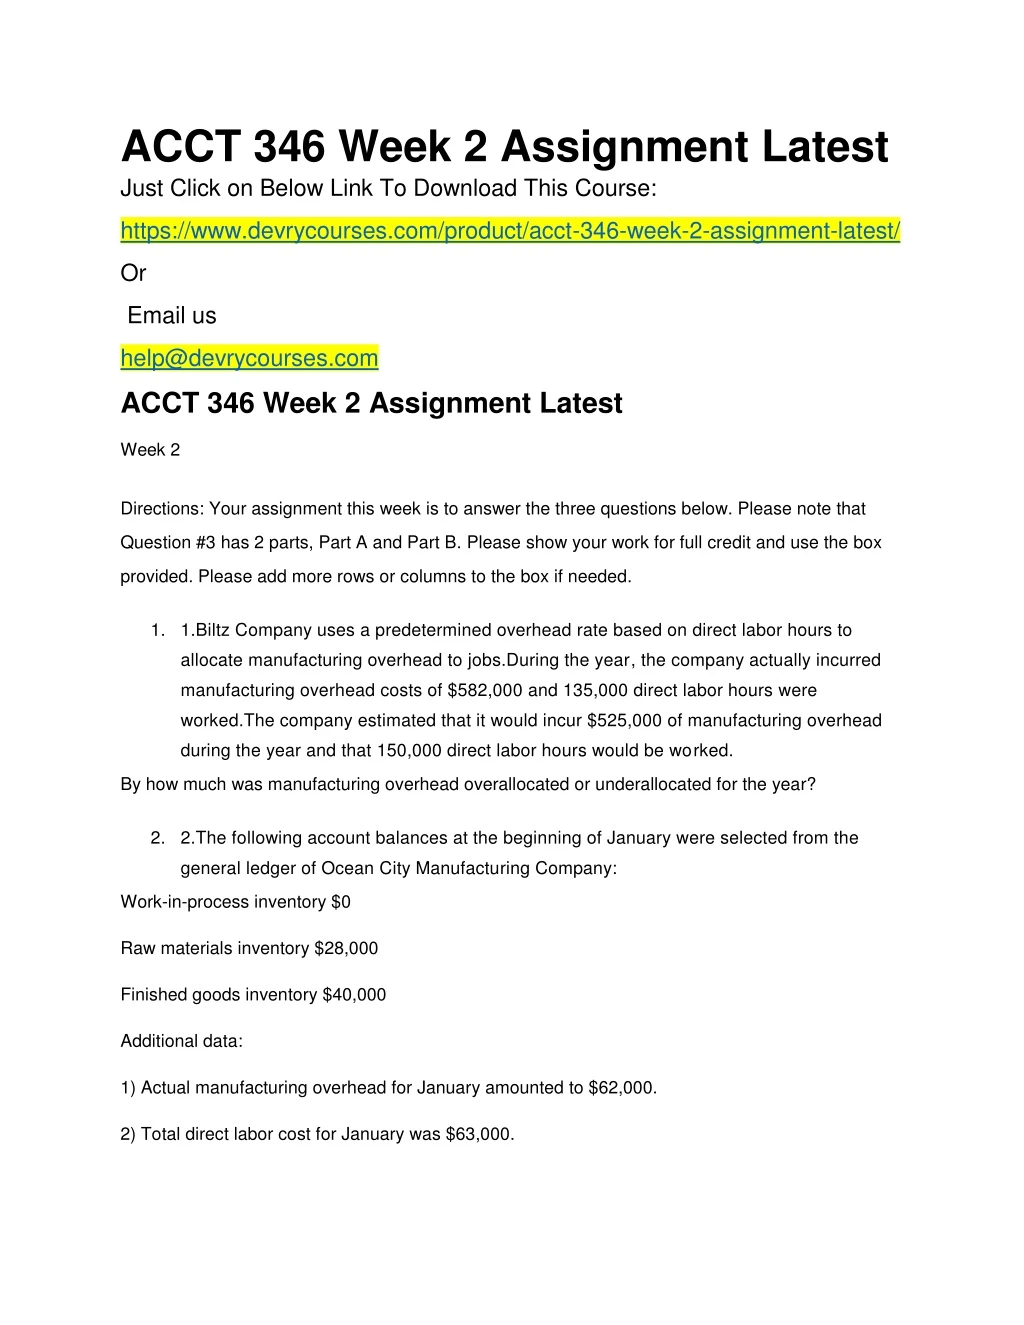 acct 346 week 2 assignment latest just click